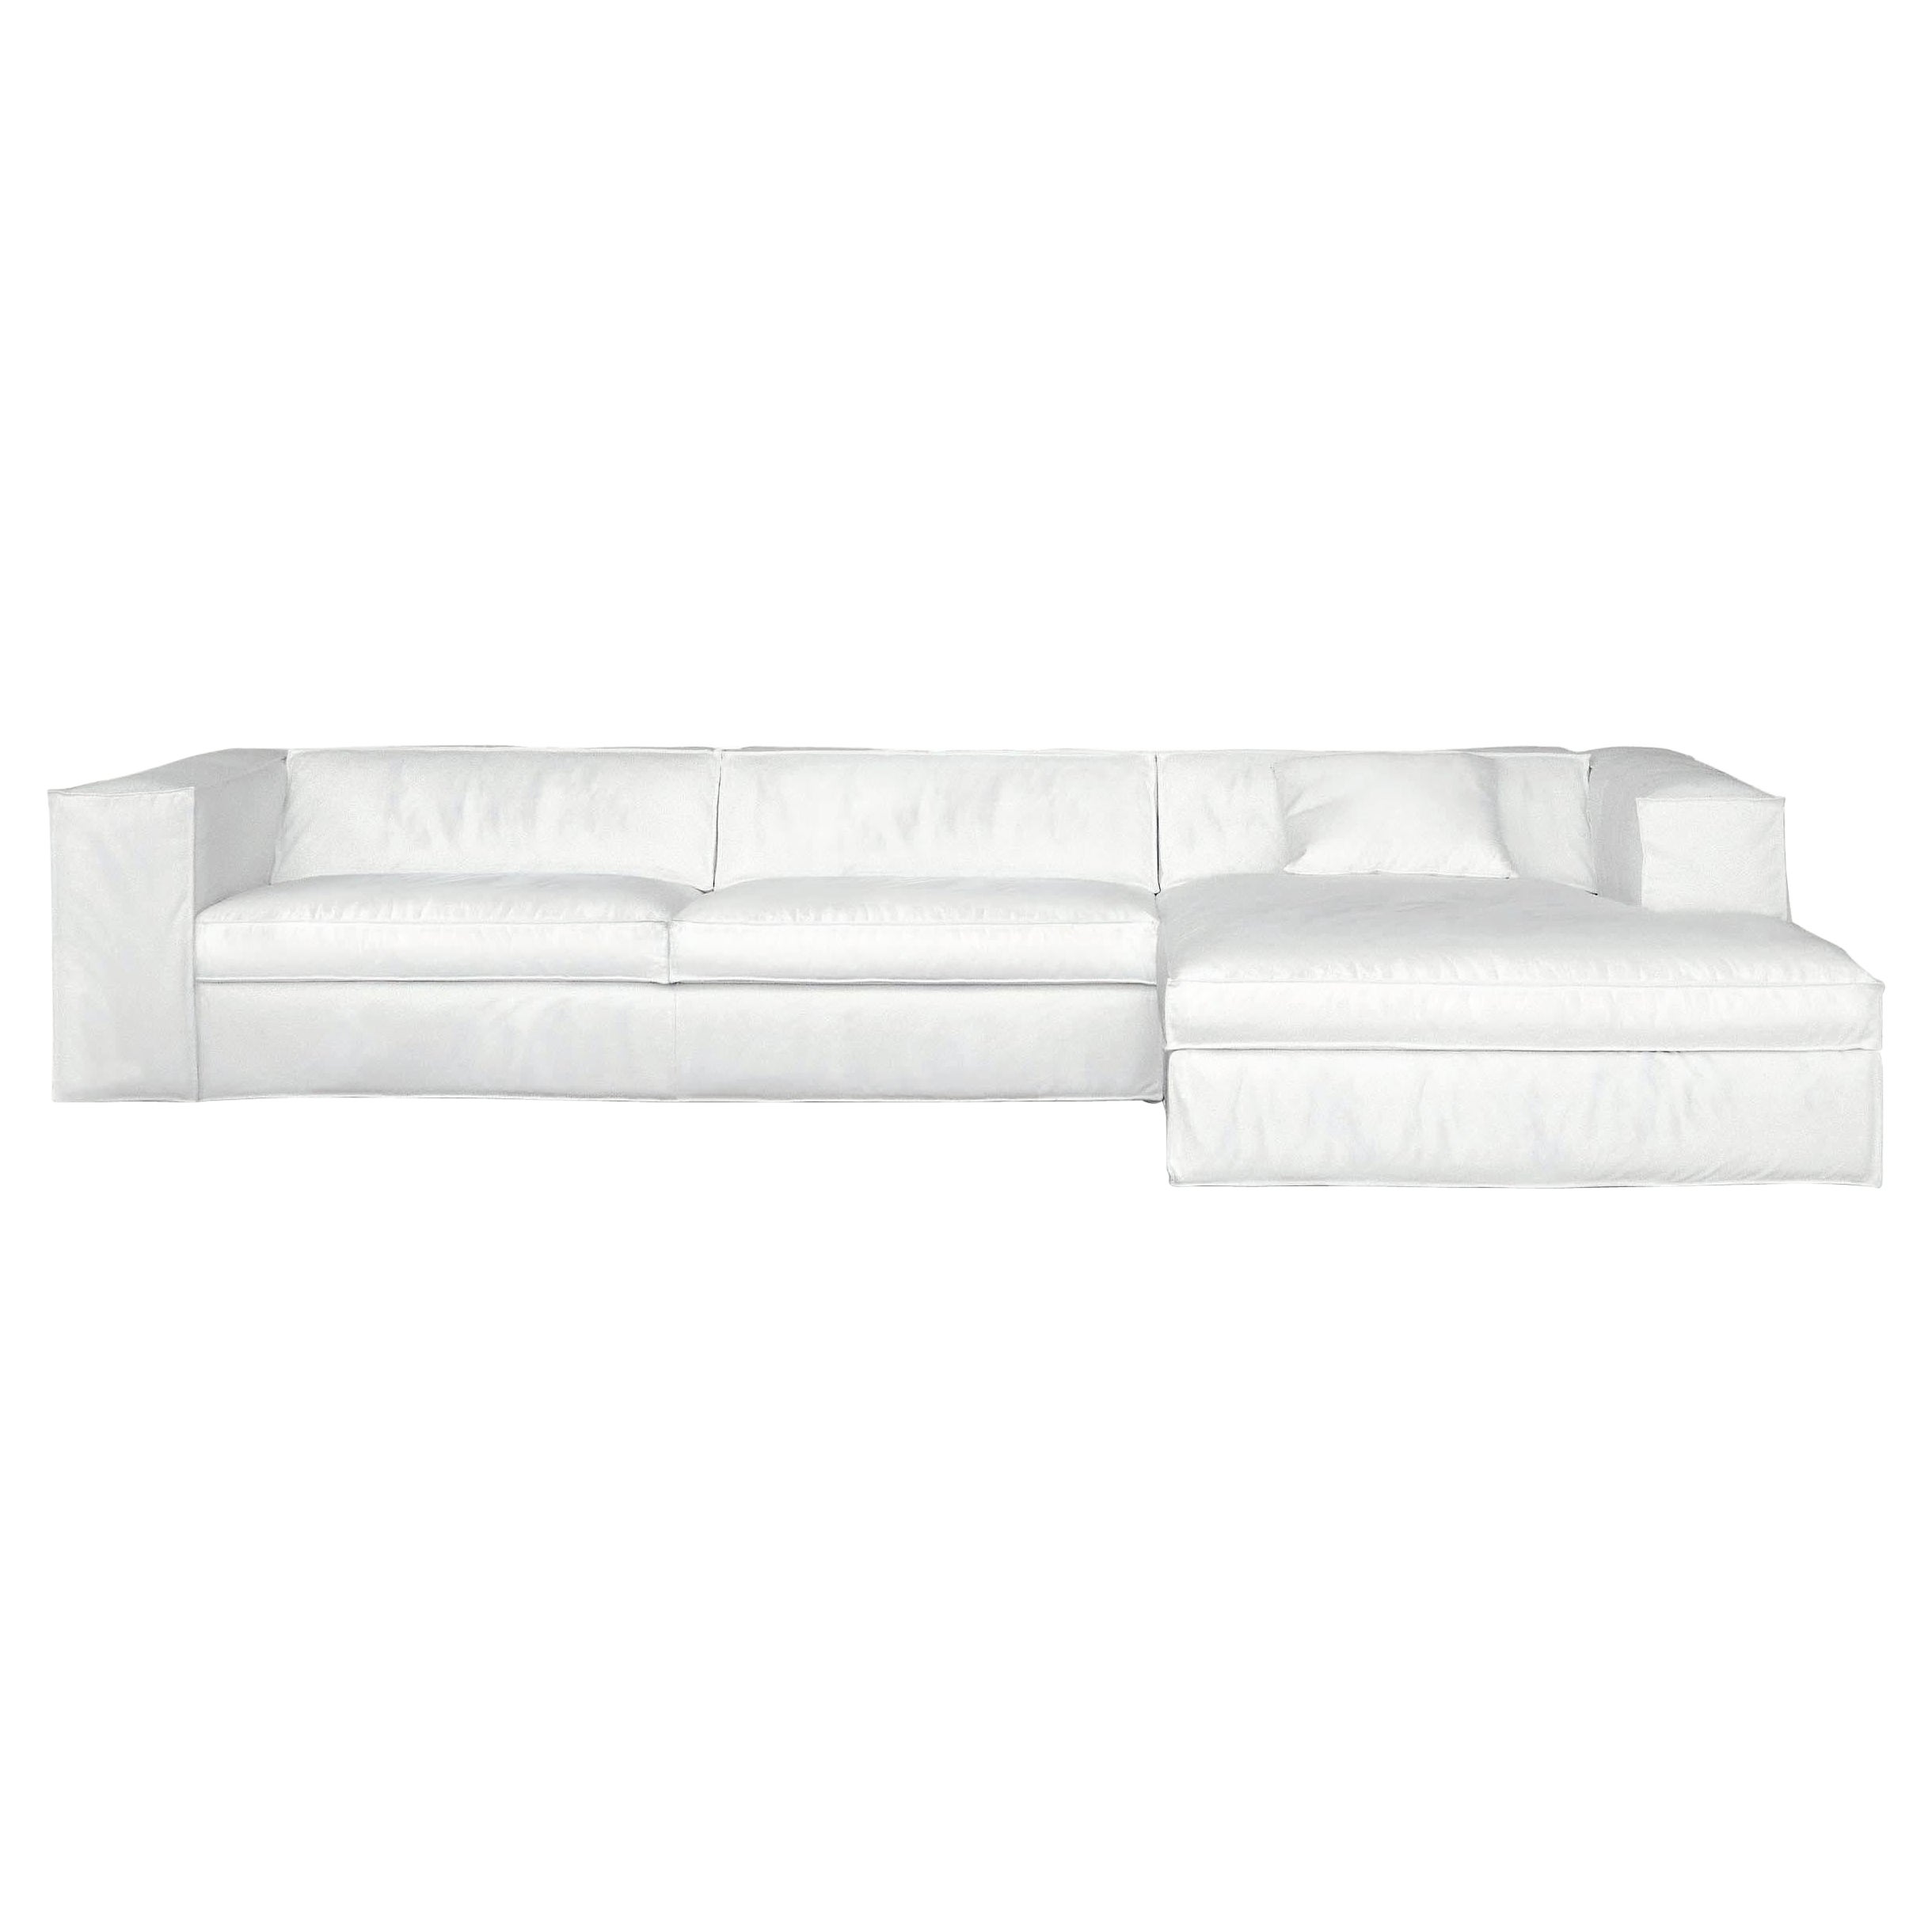 Up Large Modular Sofa in Kami White Upholstery by Giuseppe Viganò